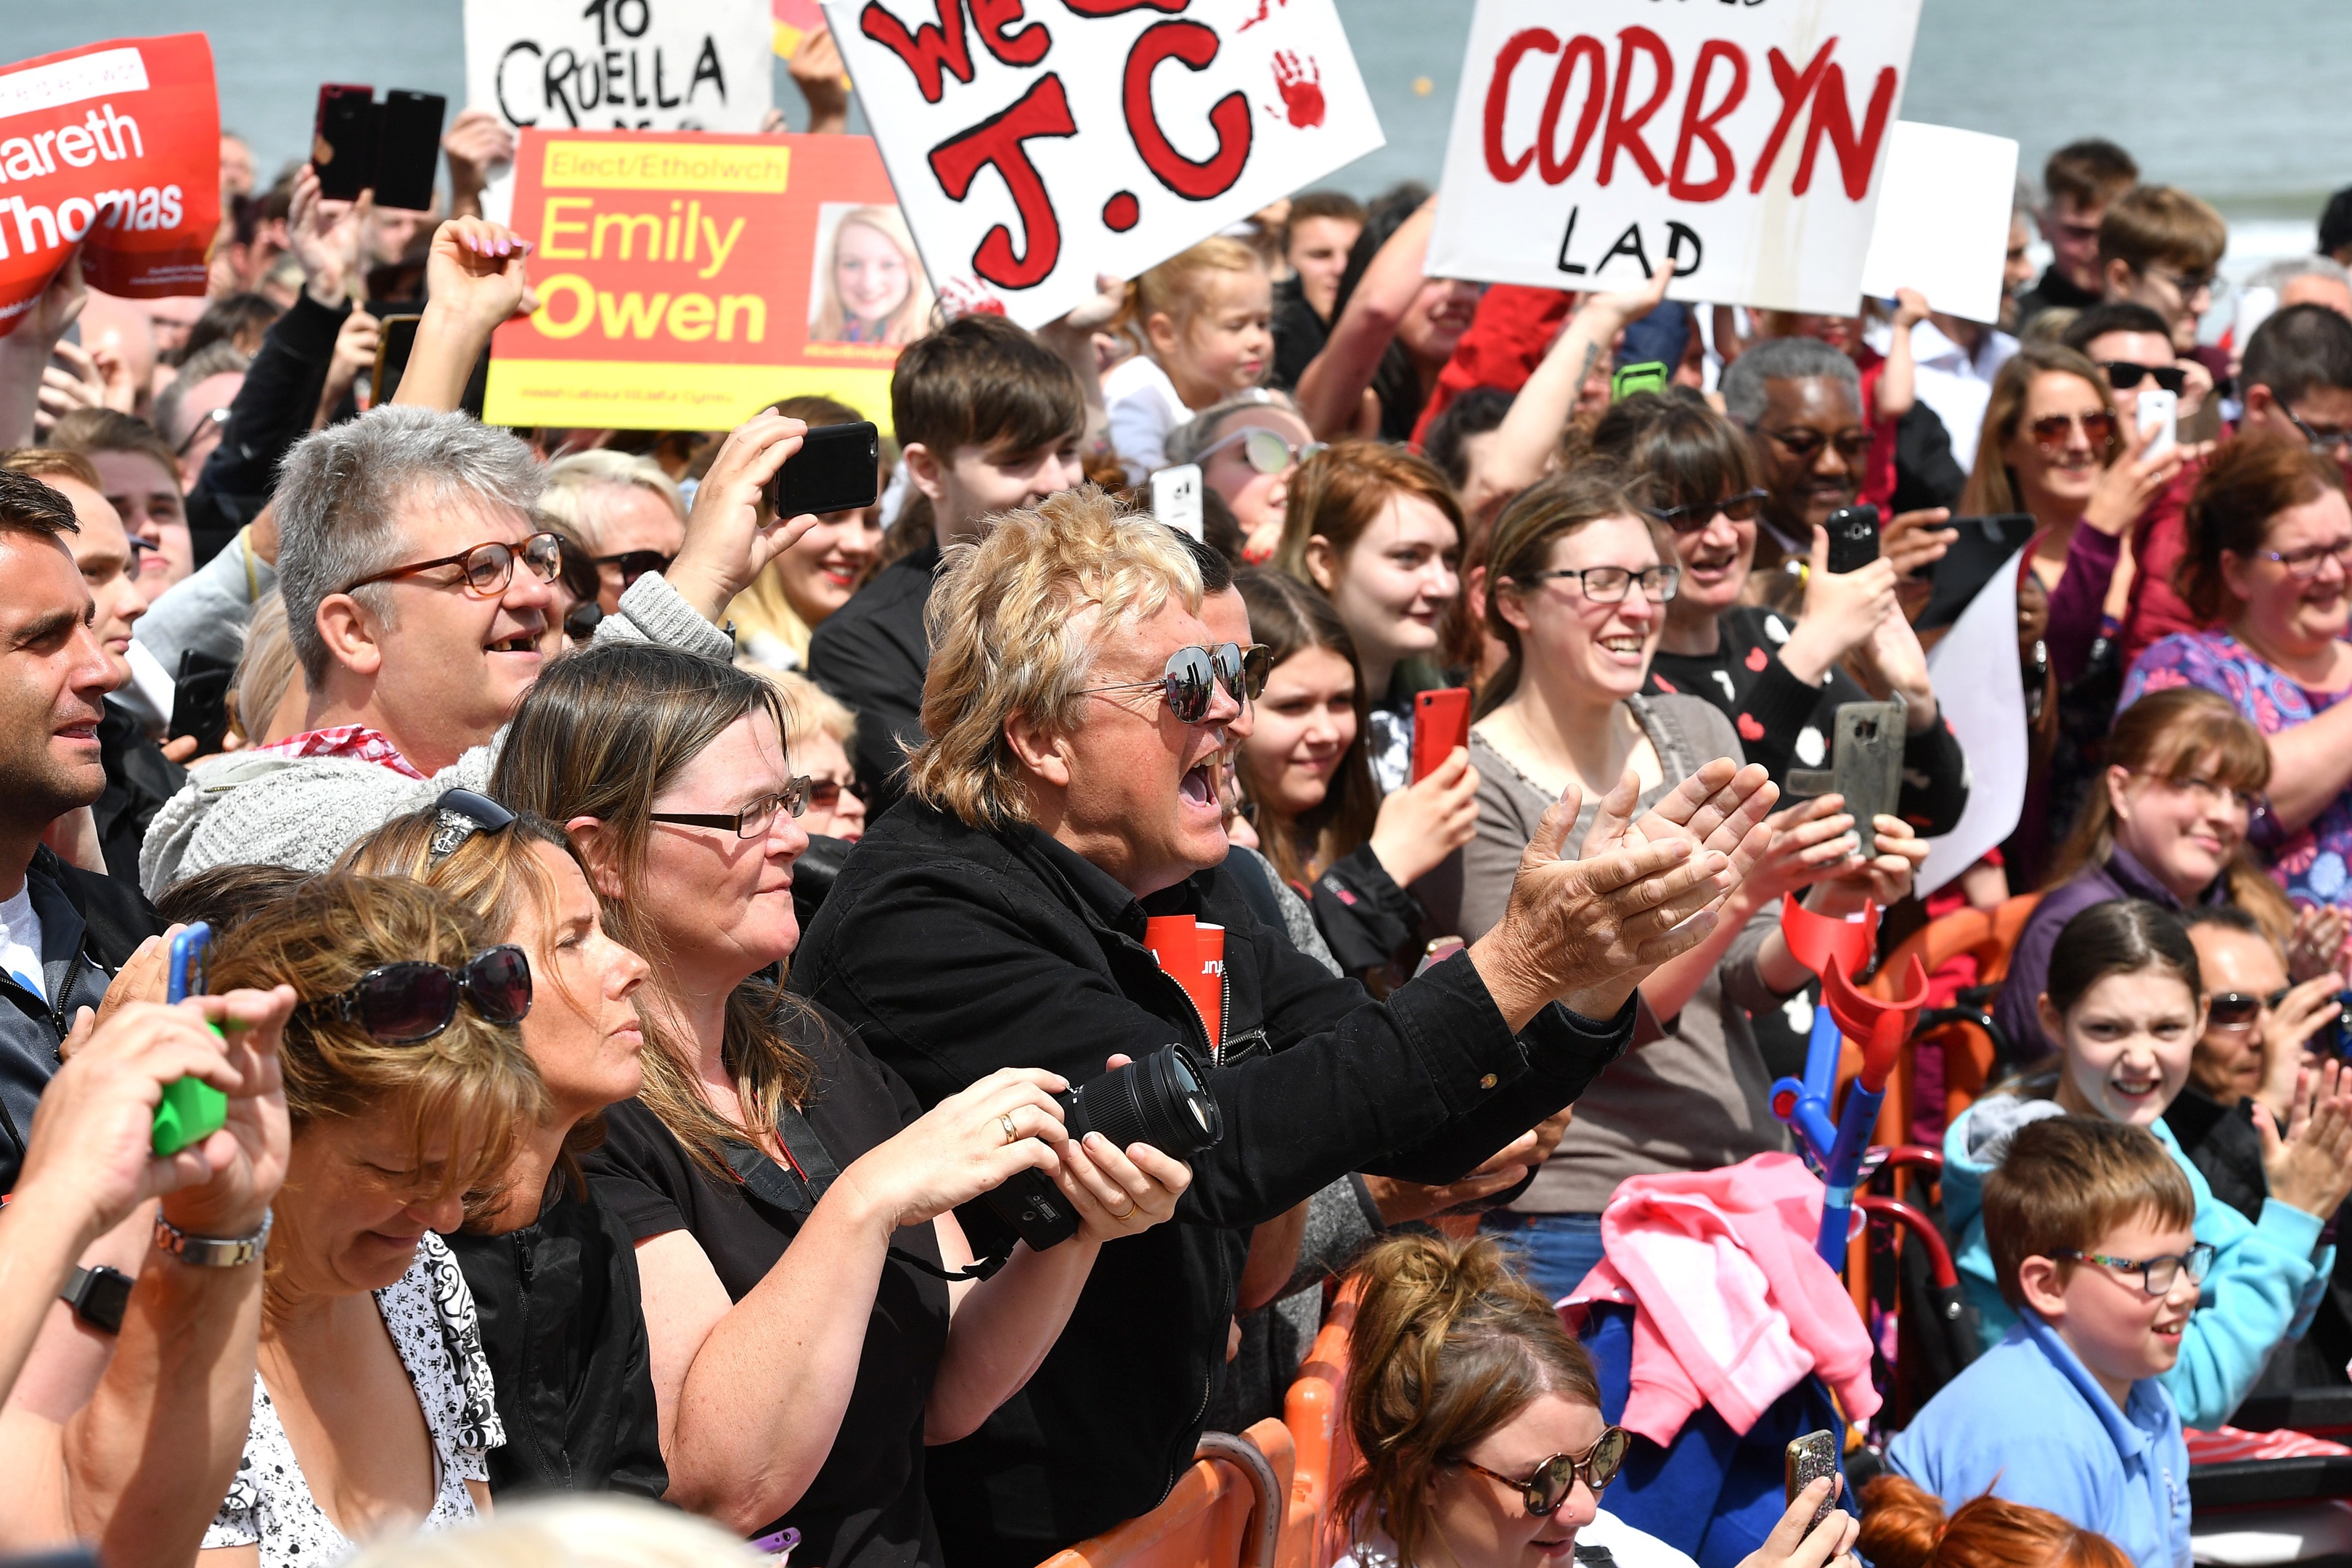 Supporters applaud as Labour party leader Jeremy Corbyn arrives to speak on the Promenade on June 7, 2017 in Colwyn Bay, Denbighshire, United Kingdom. (Anthony Devlin/Getty Images)